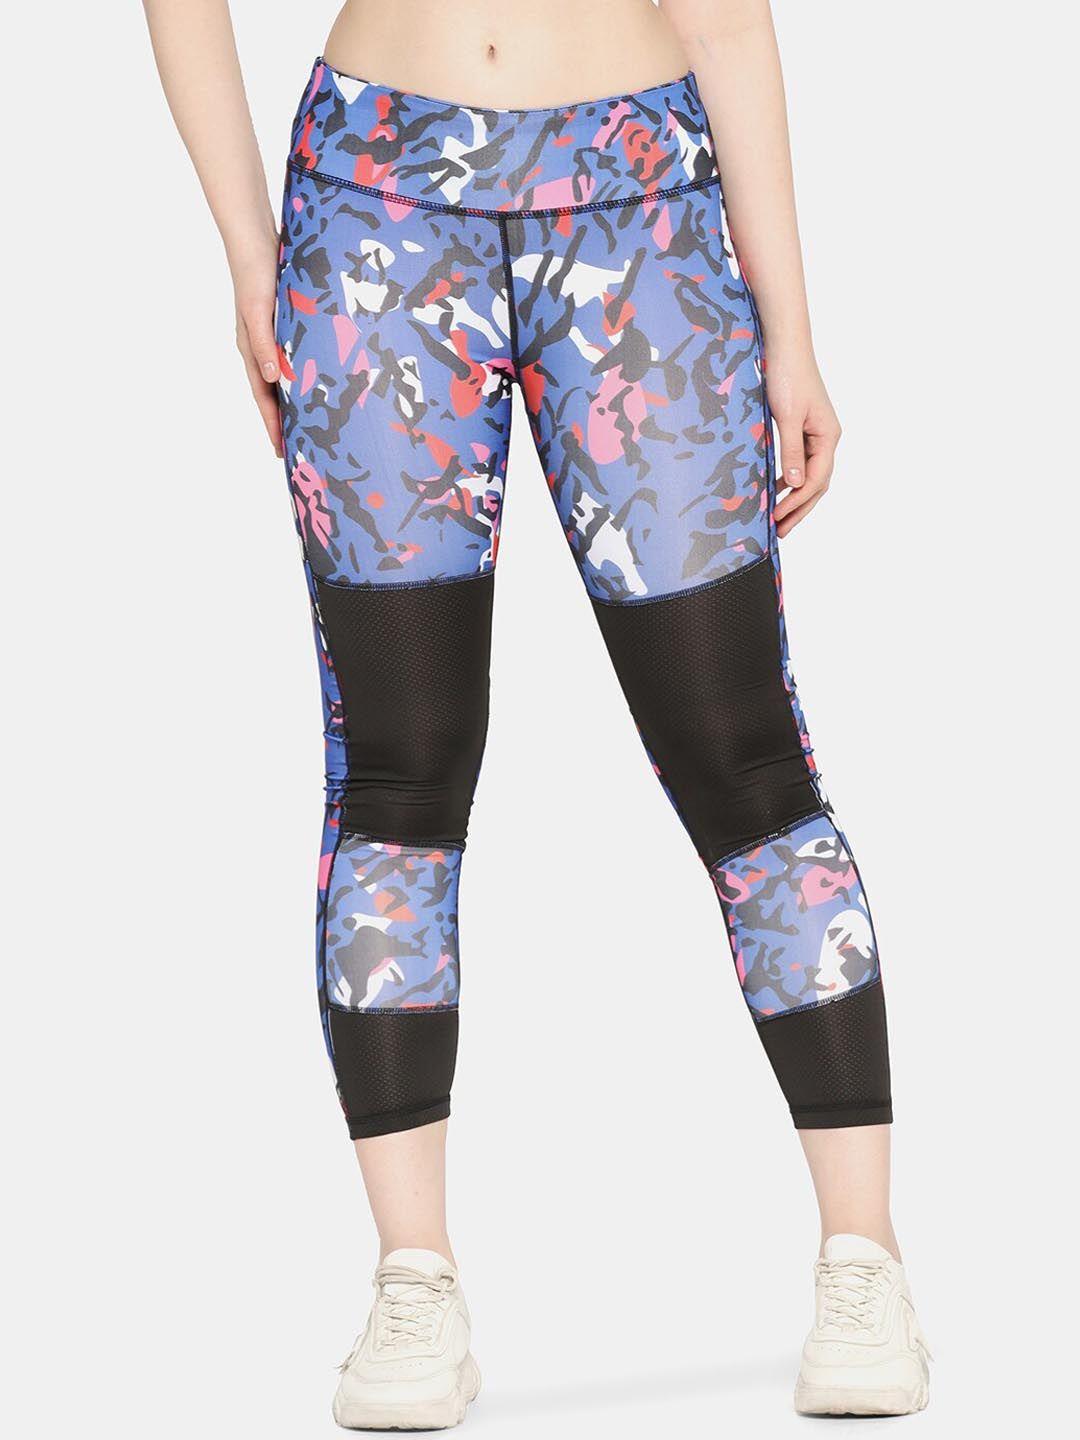 da-intimo-women-printed-dry-fit-ankle-length-training-or-gym-sports-tights